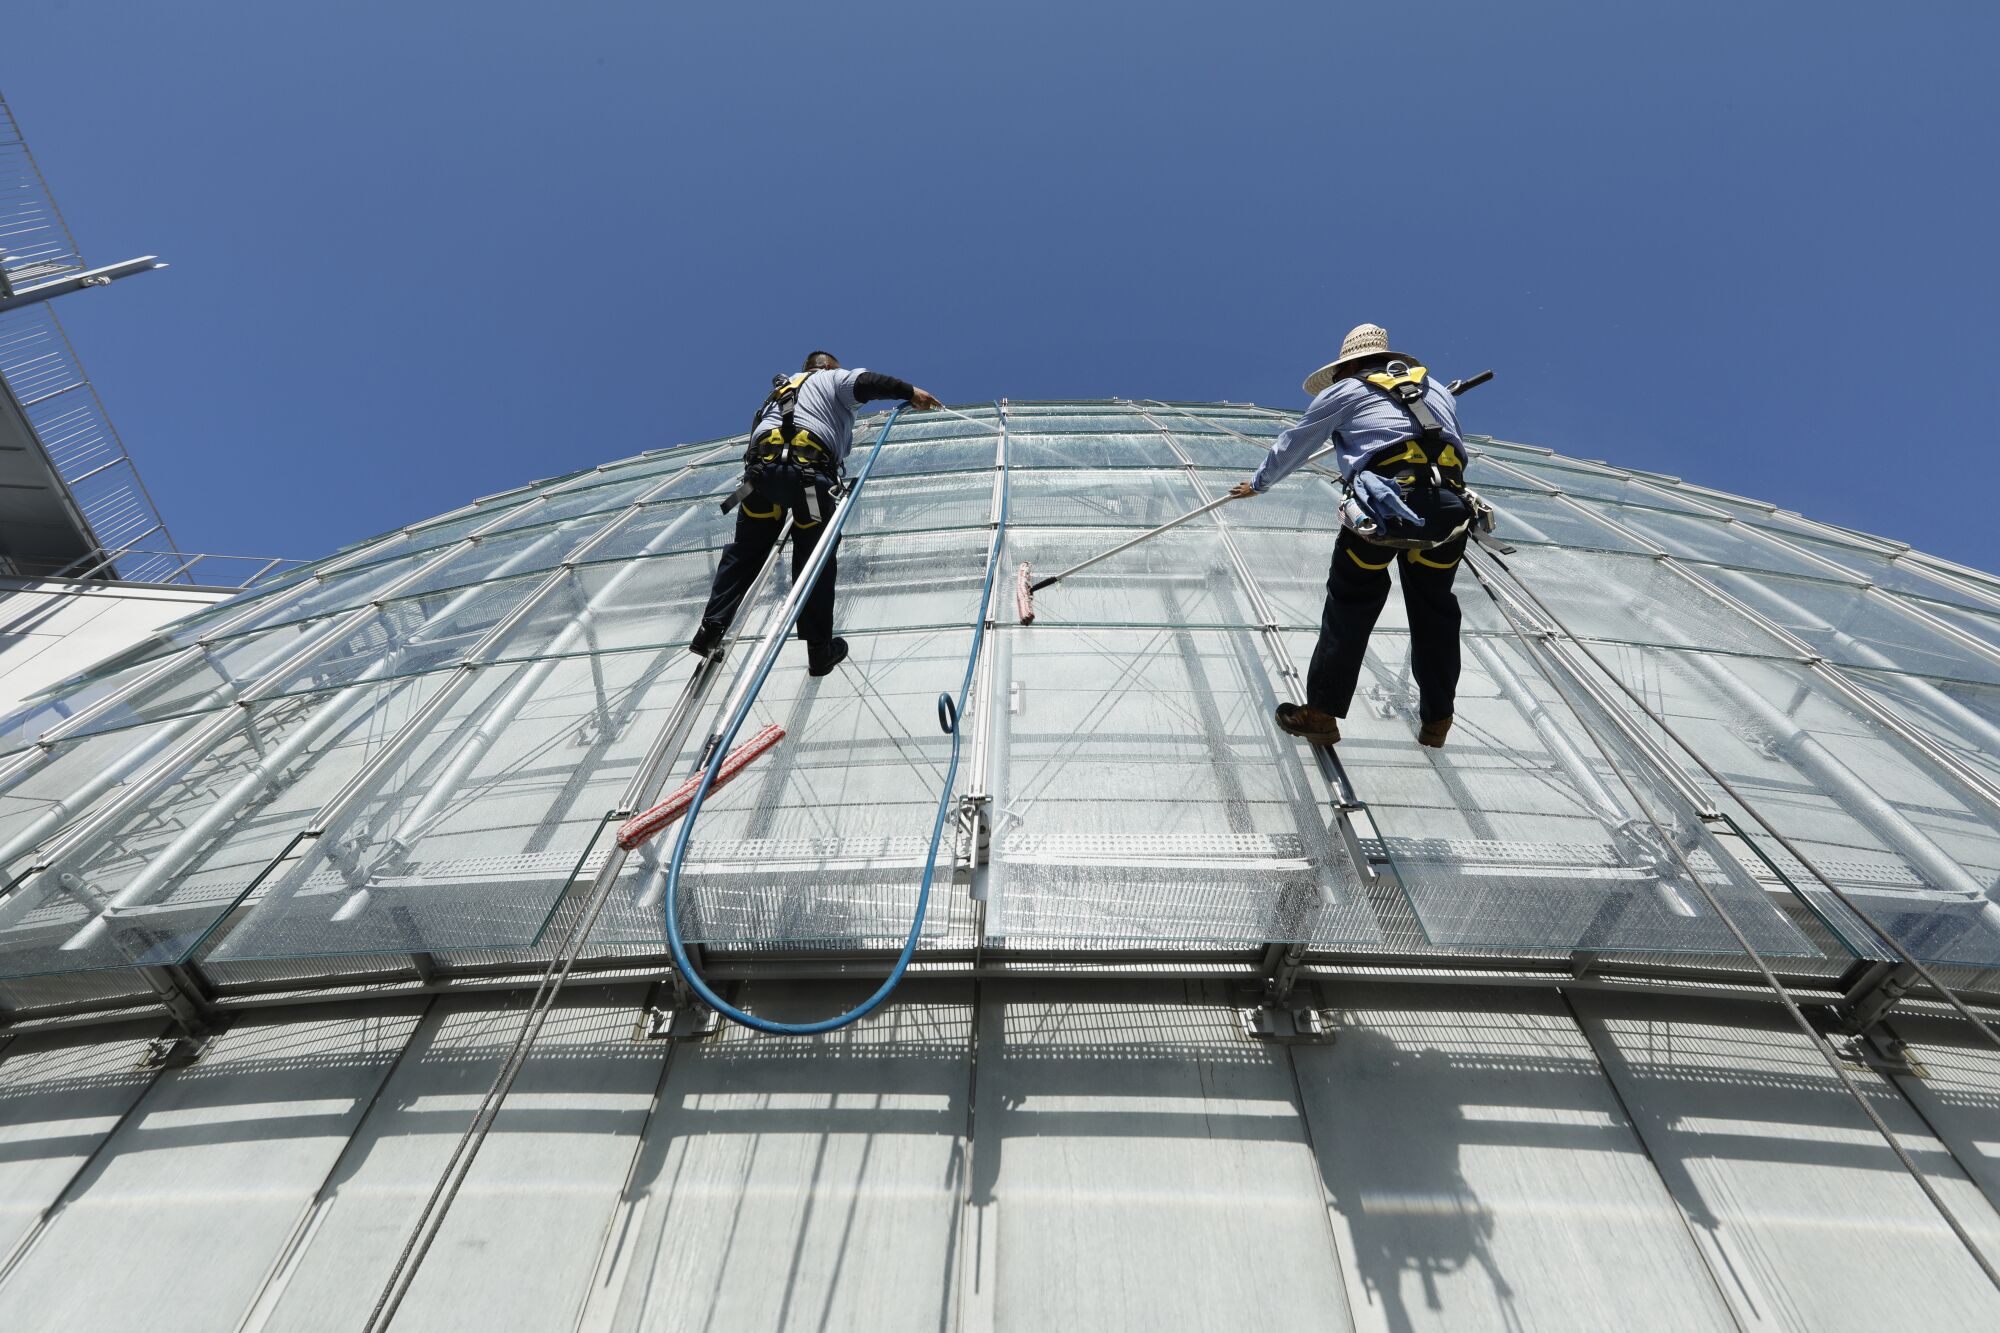  Mario Guzman and Jesus Garcia clean the windows on the giant glass dome of the Academy Museum of Motion Pictures. 